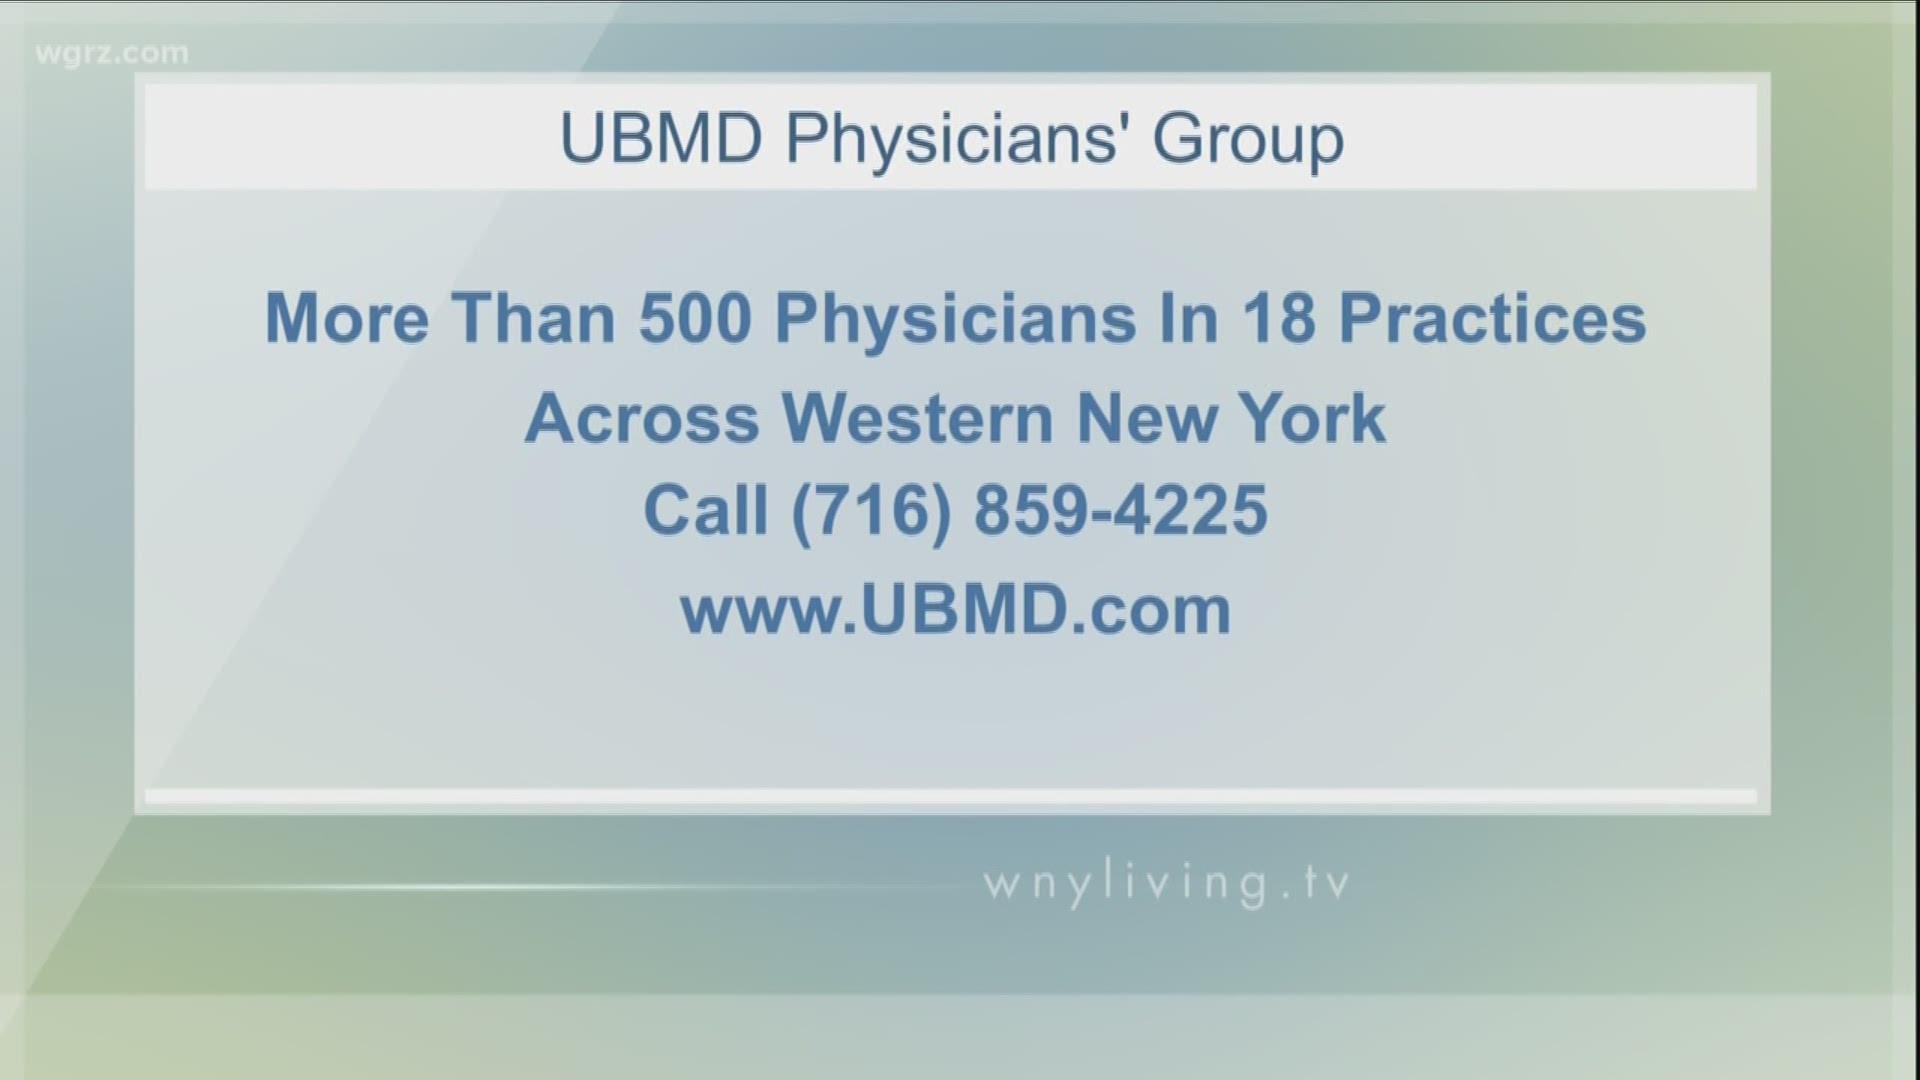 WNY Living - May 25 - UBMD Physician's Group (SPONSORED CONTENT)